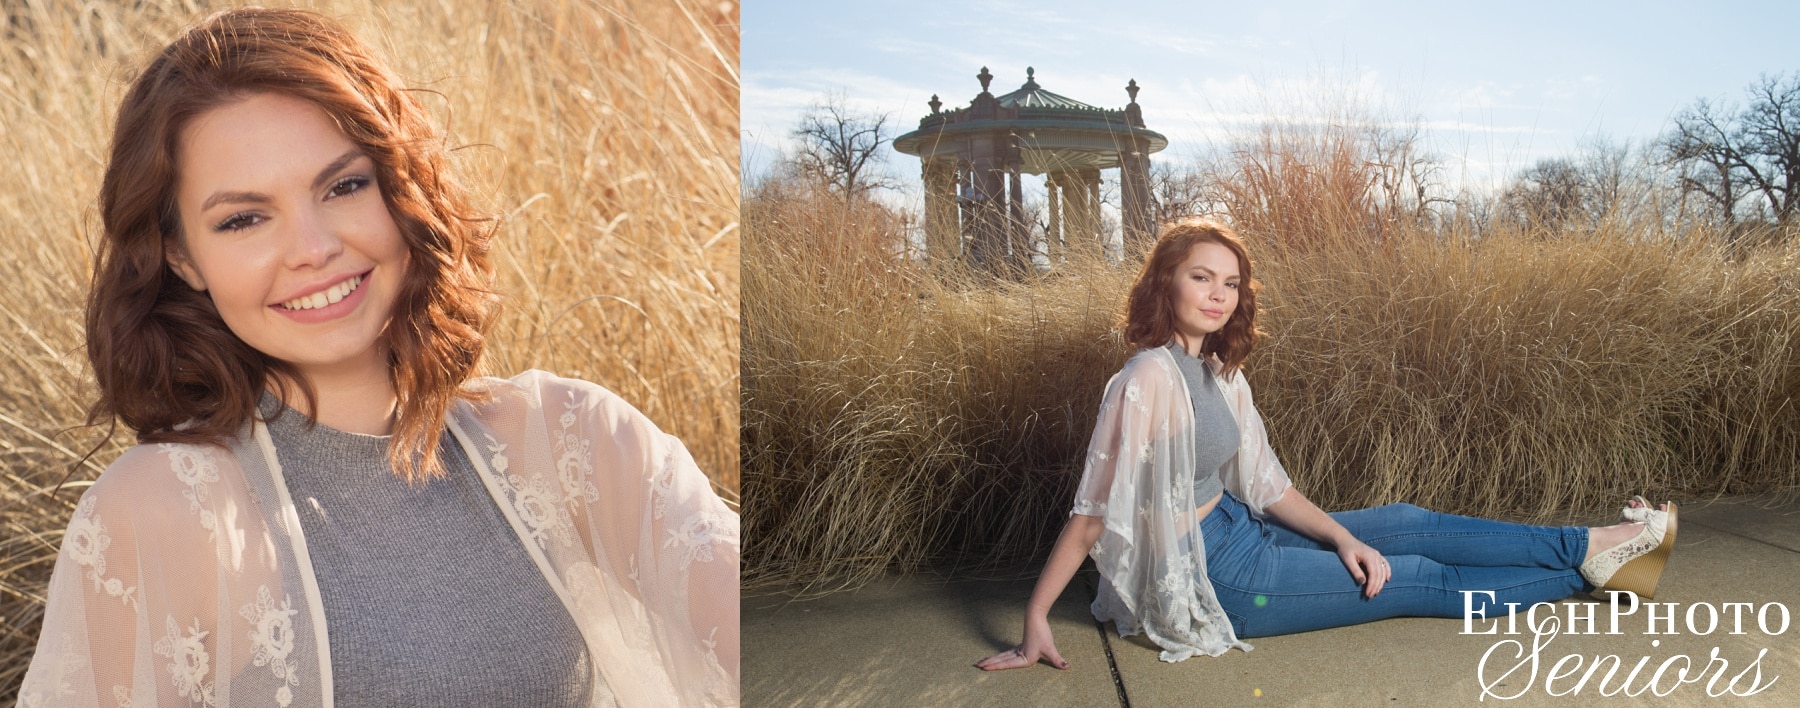 Fall Senior Portraits in Forest Park in St. Louis. Senior girl in front of tall grass at THE NATHAN FRANK BANDSTAND gazebo inside PAGODA CIRCLE at Forest Park